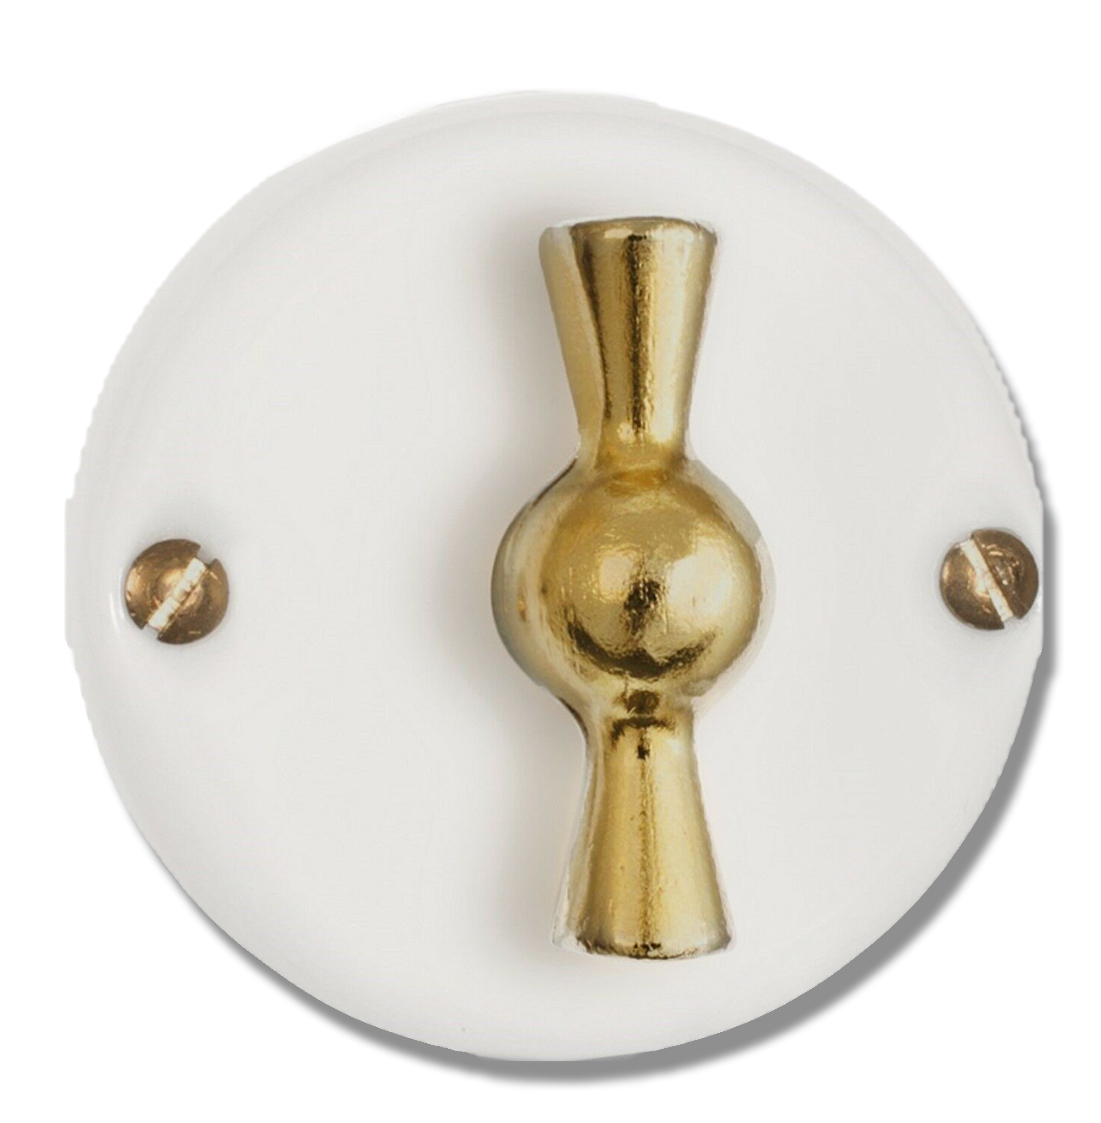 Momentary Push Button. Brass Rotary Lever. Porcelain Base